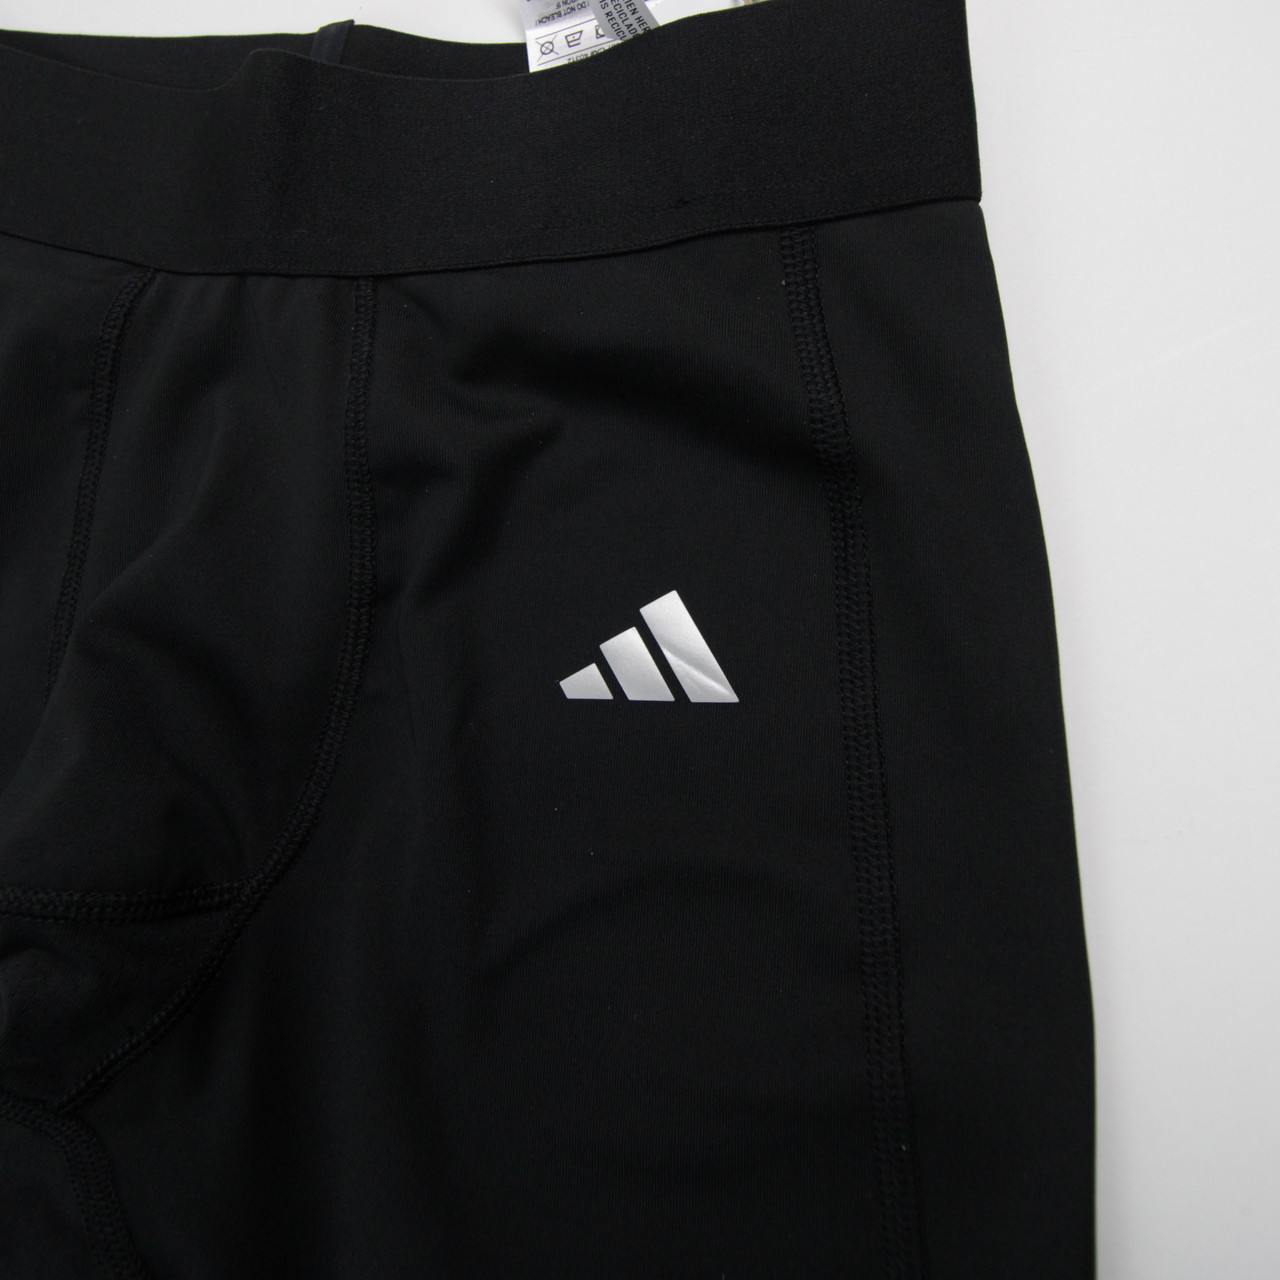 NEW Men's Adidas Techfit Climalite Sport Compression Padded